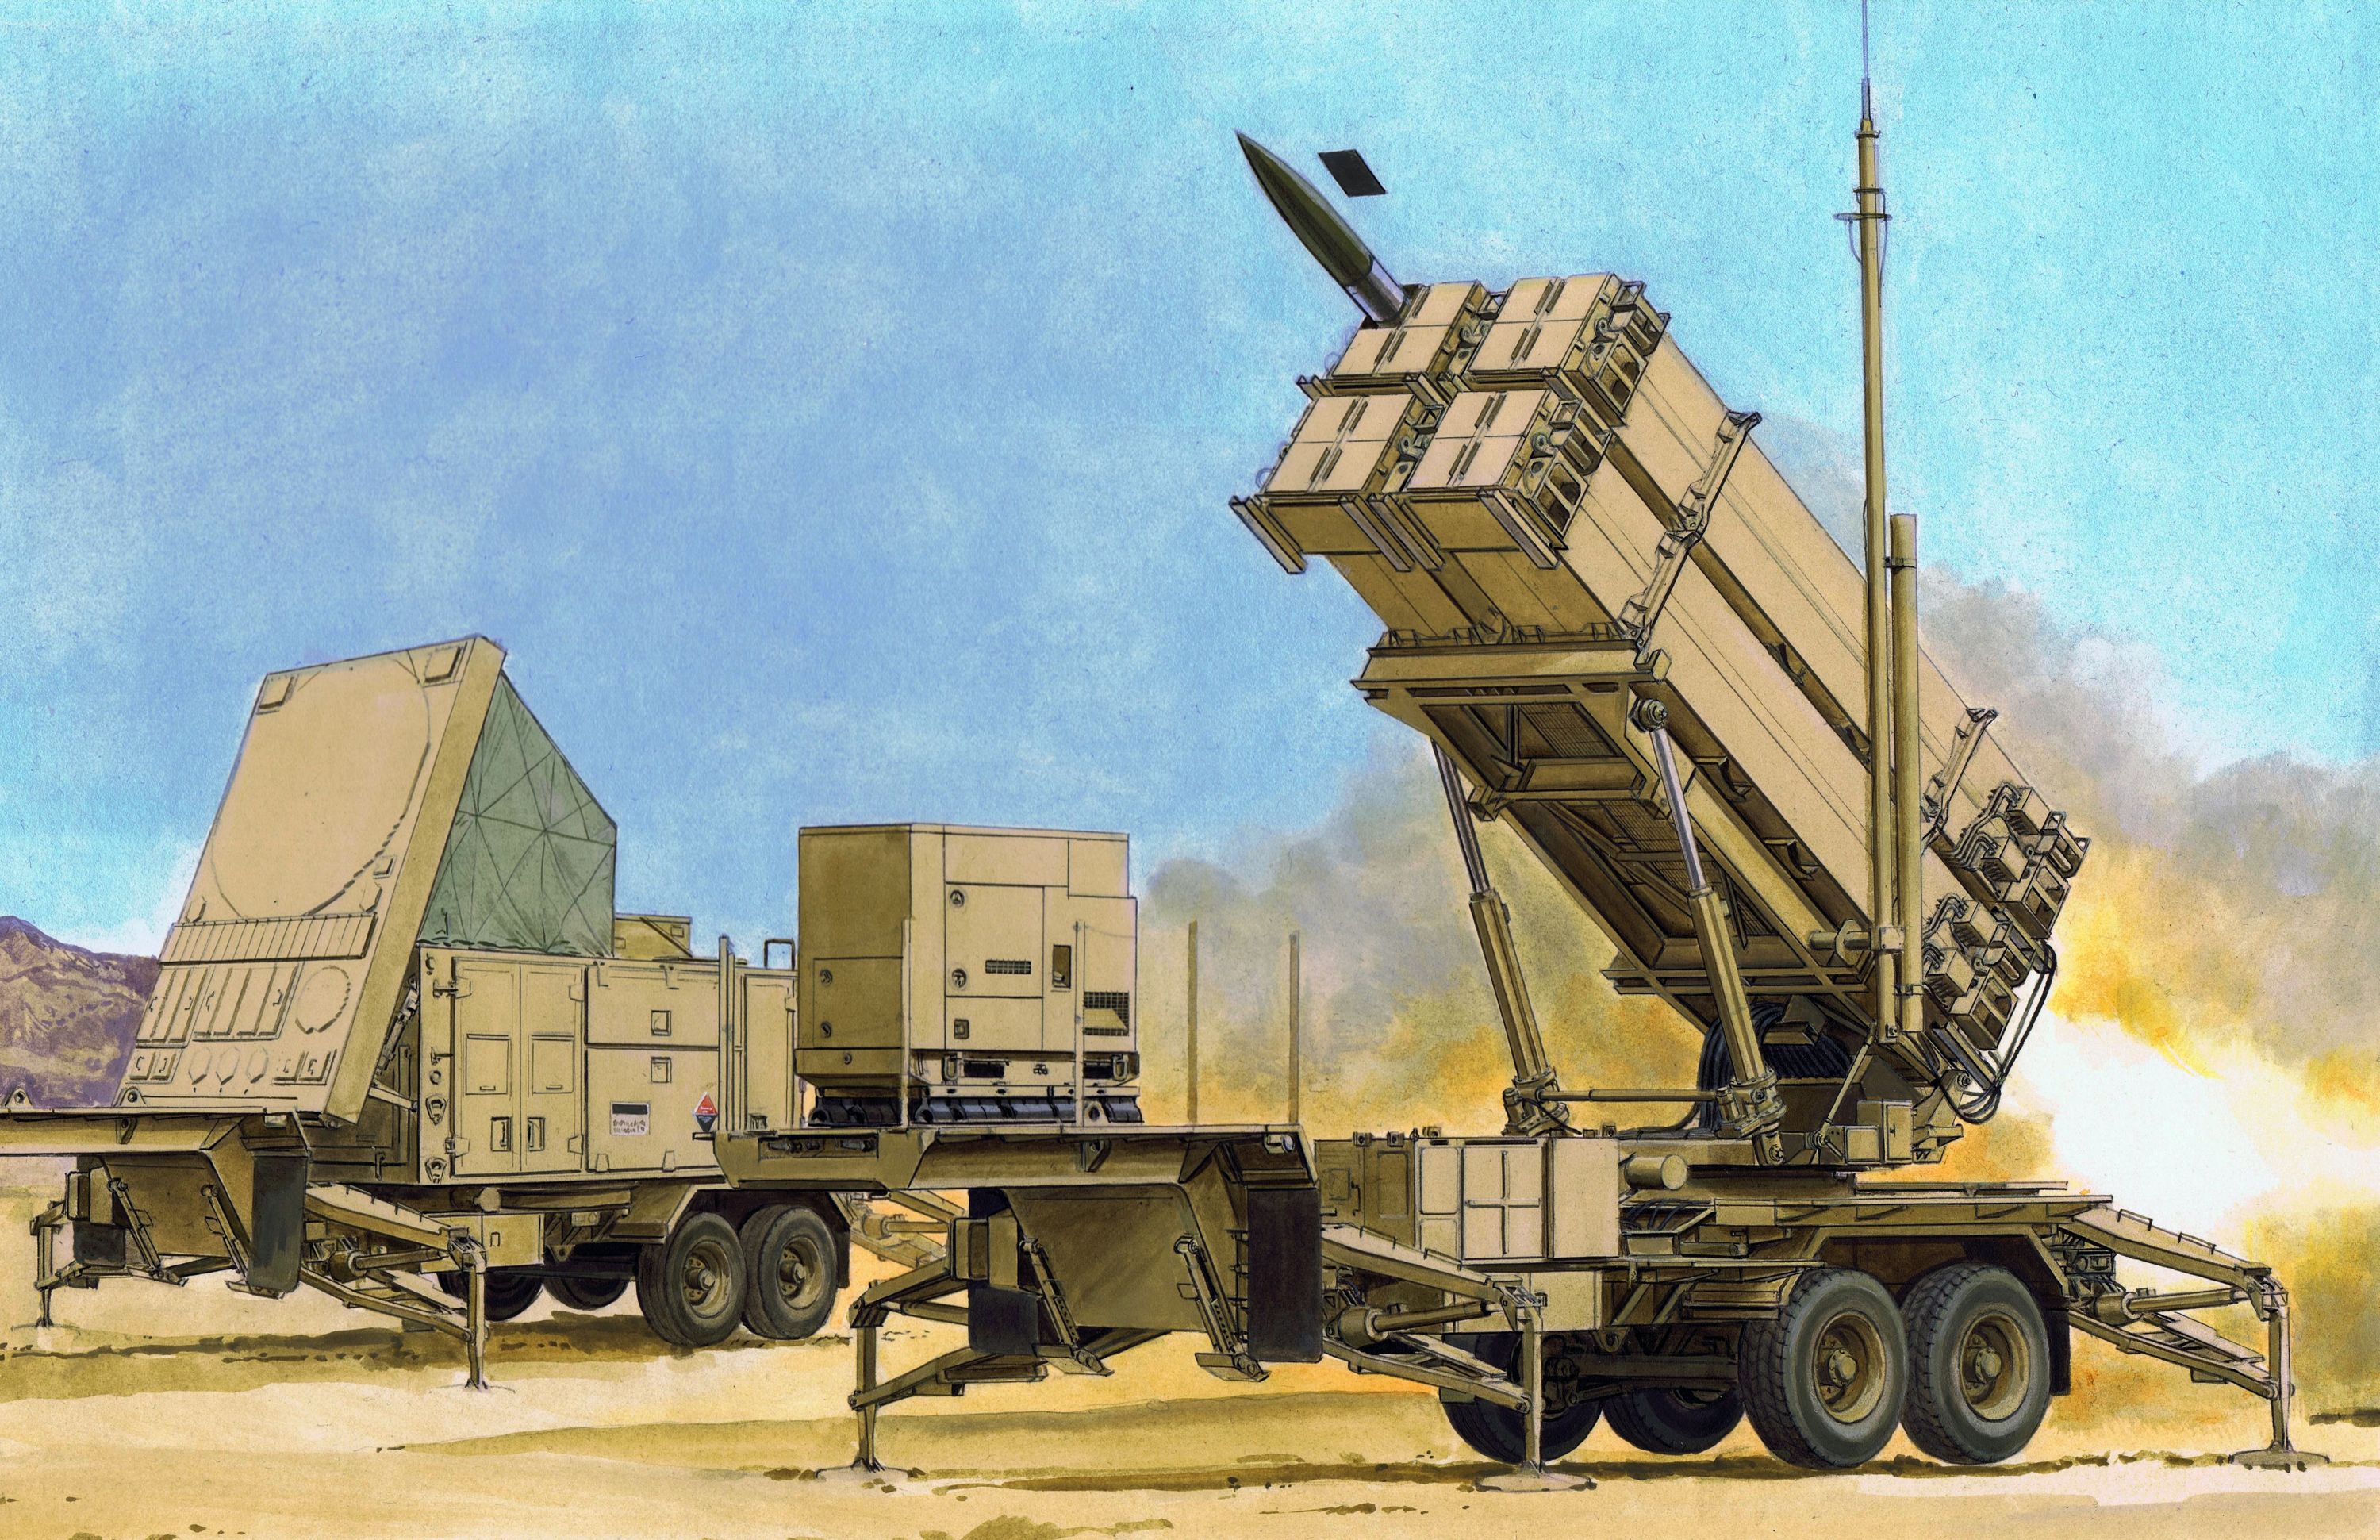 Model-Kit-military-3563-MIM-104F-PATRIOT-SURFACE-TO-AIR-MISSILE-SAM-SYSTEM-PAC-3-1-35-_a64443147_10374.aspx